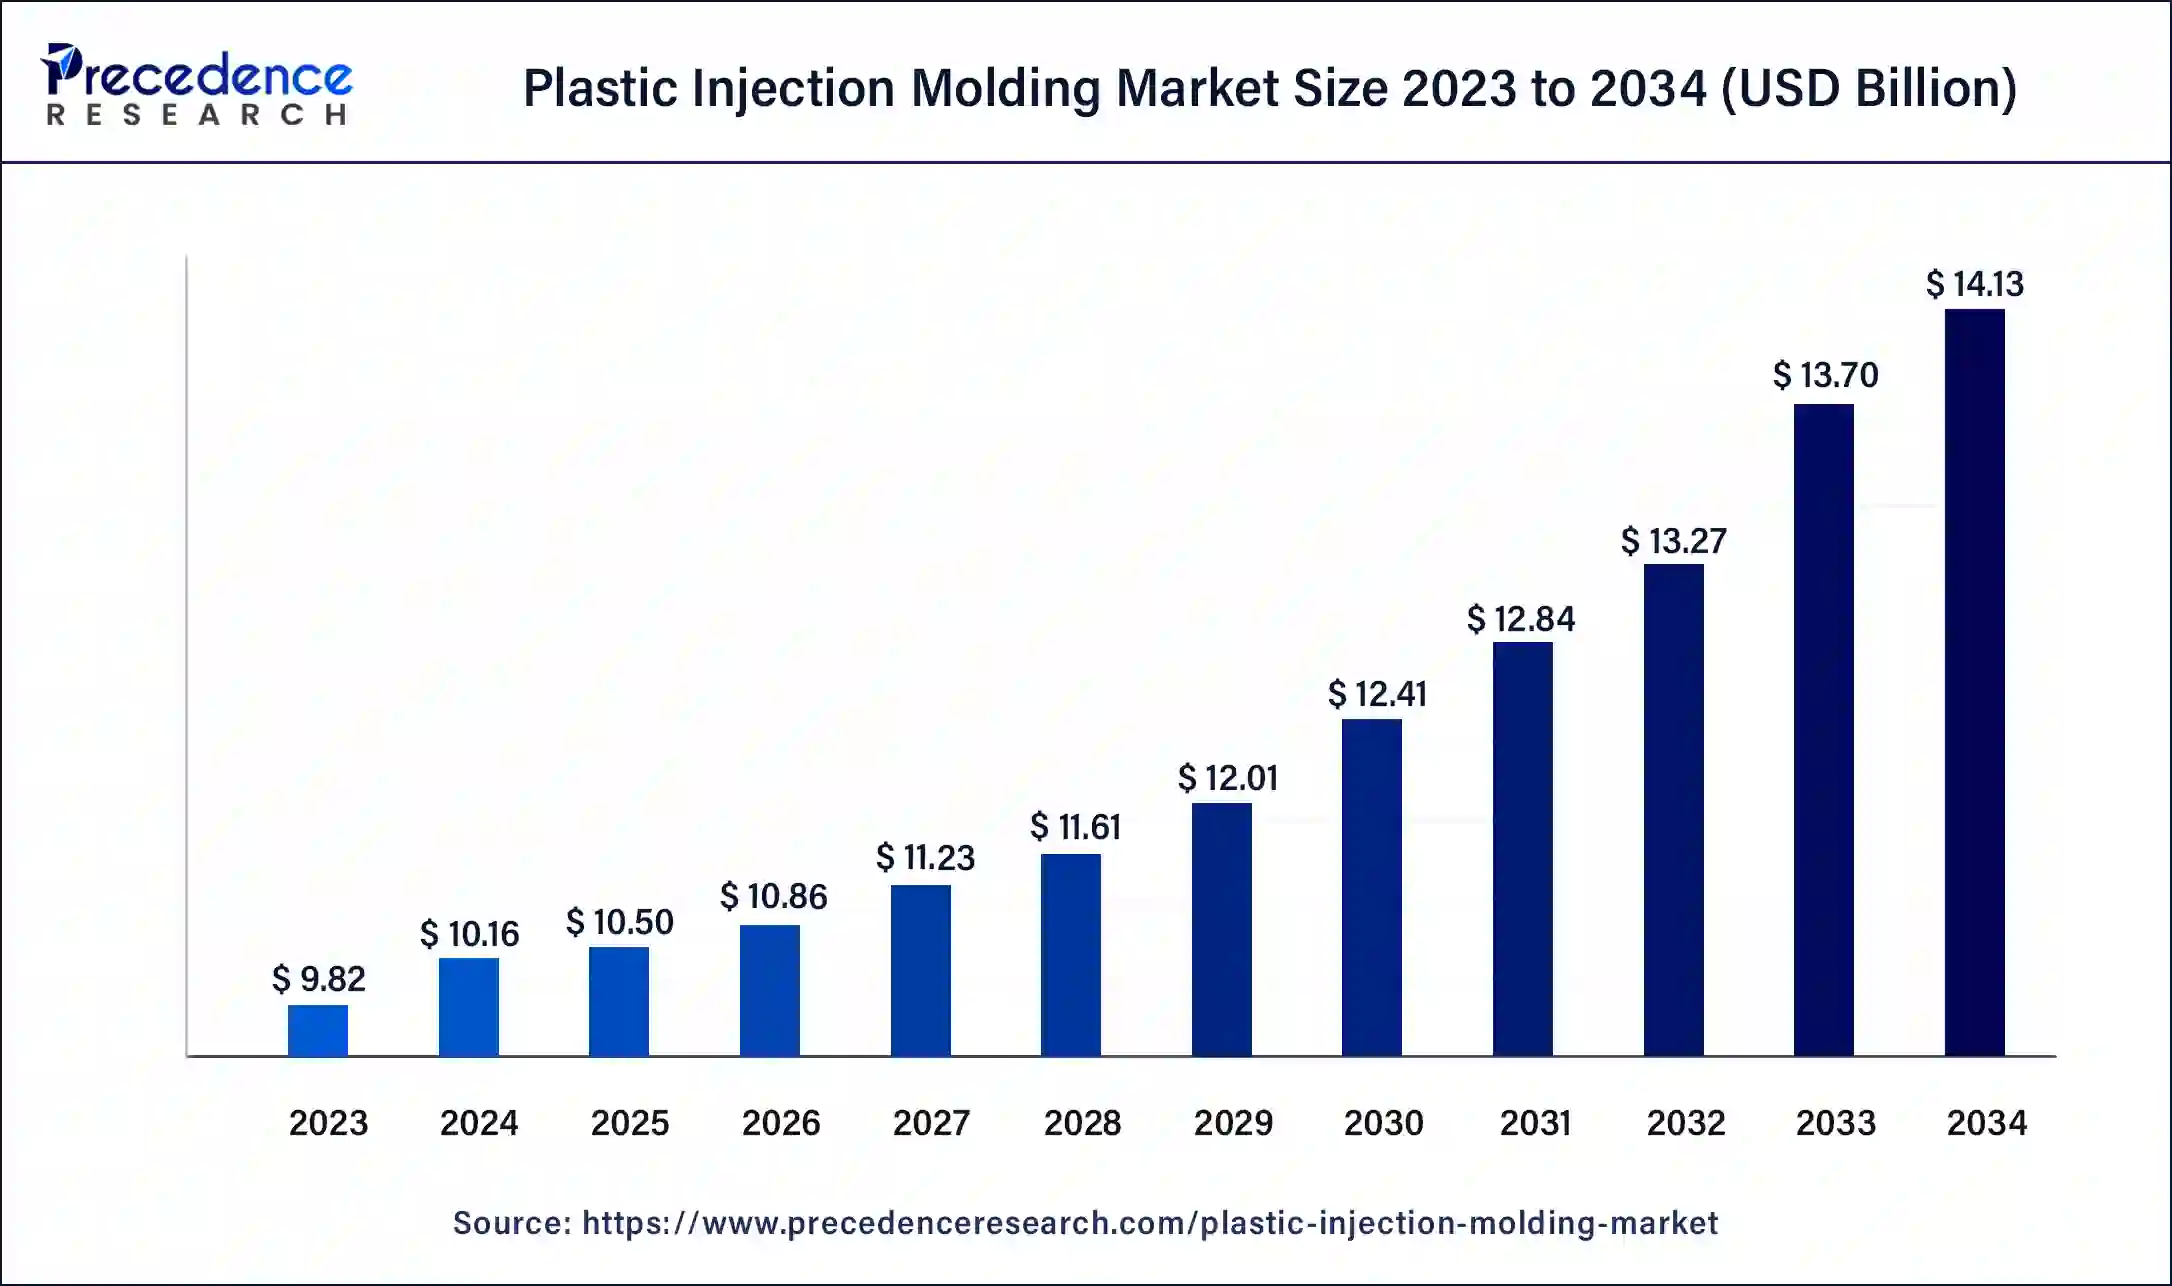 Plastic Injection Molding Market Size 2024 to 2034